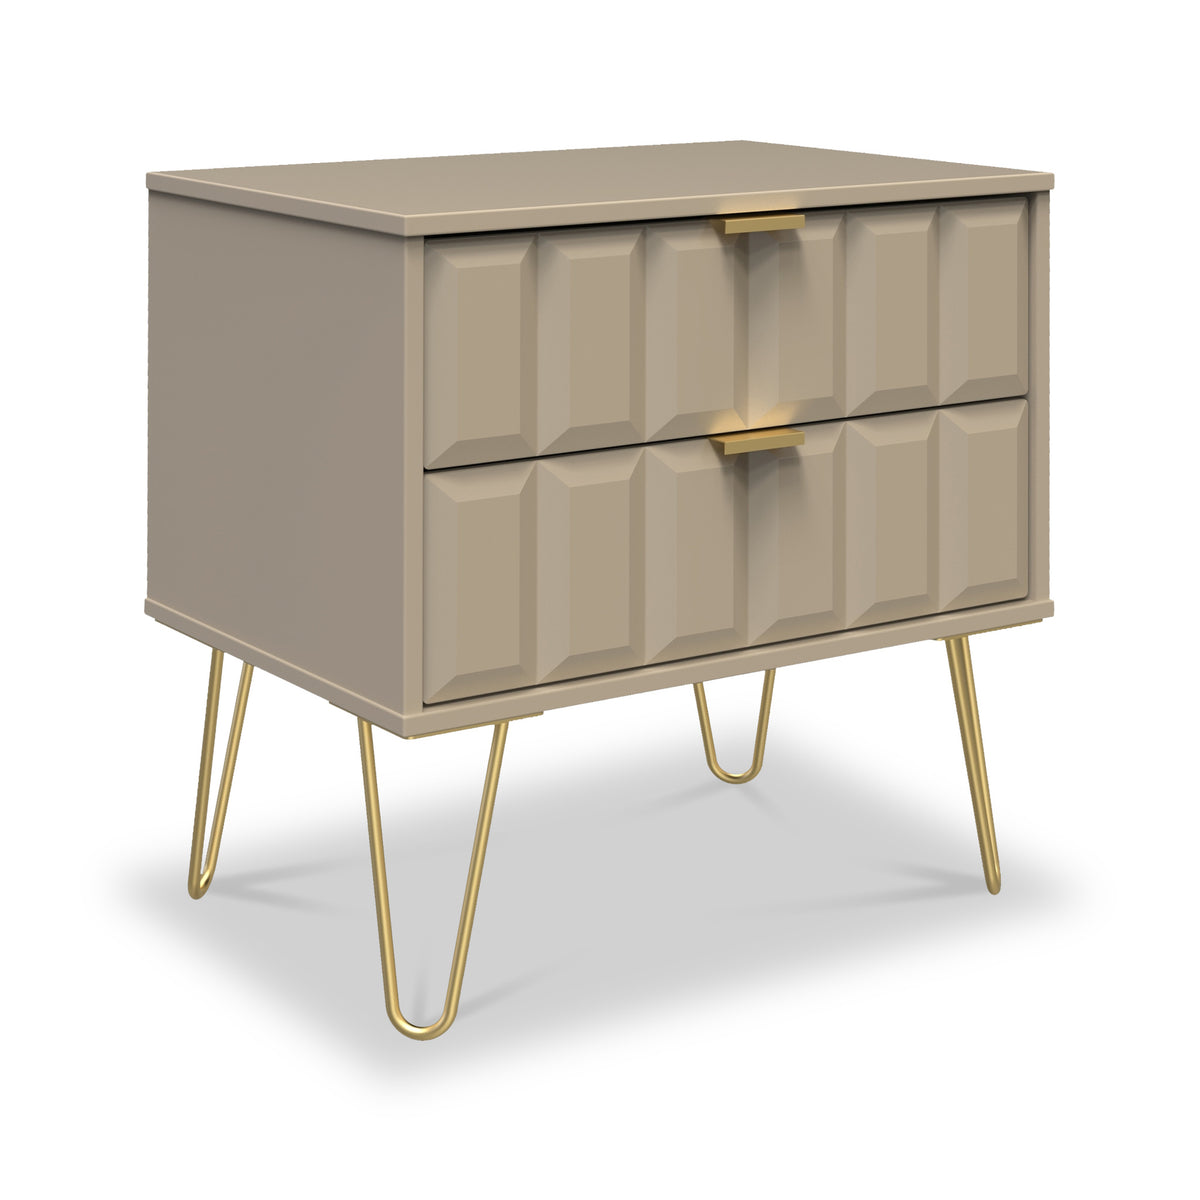 Harlow Taupe 2 Drawer Utility Chest with Gold Hairpin Legs from Roseland